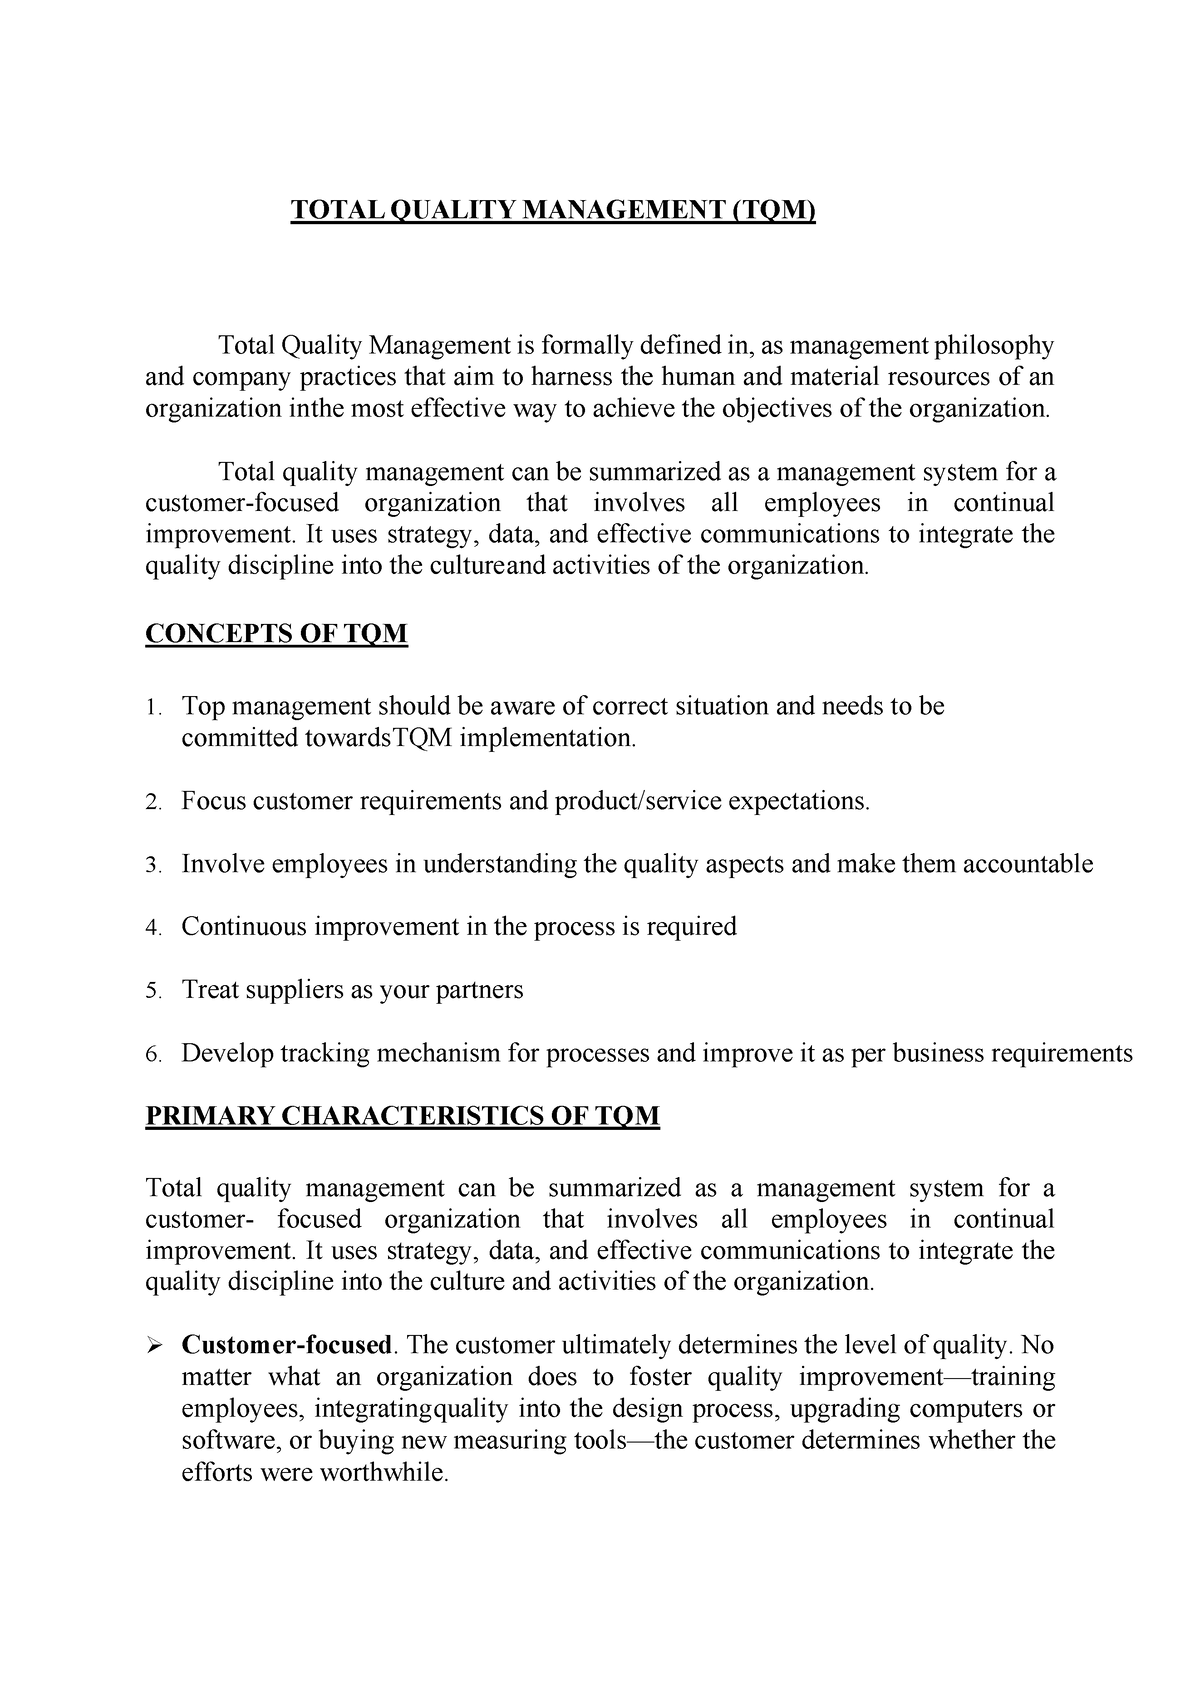 thesis related to total quality management